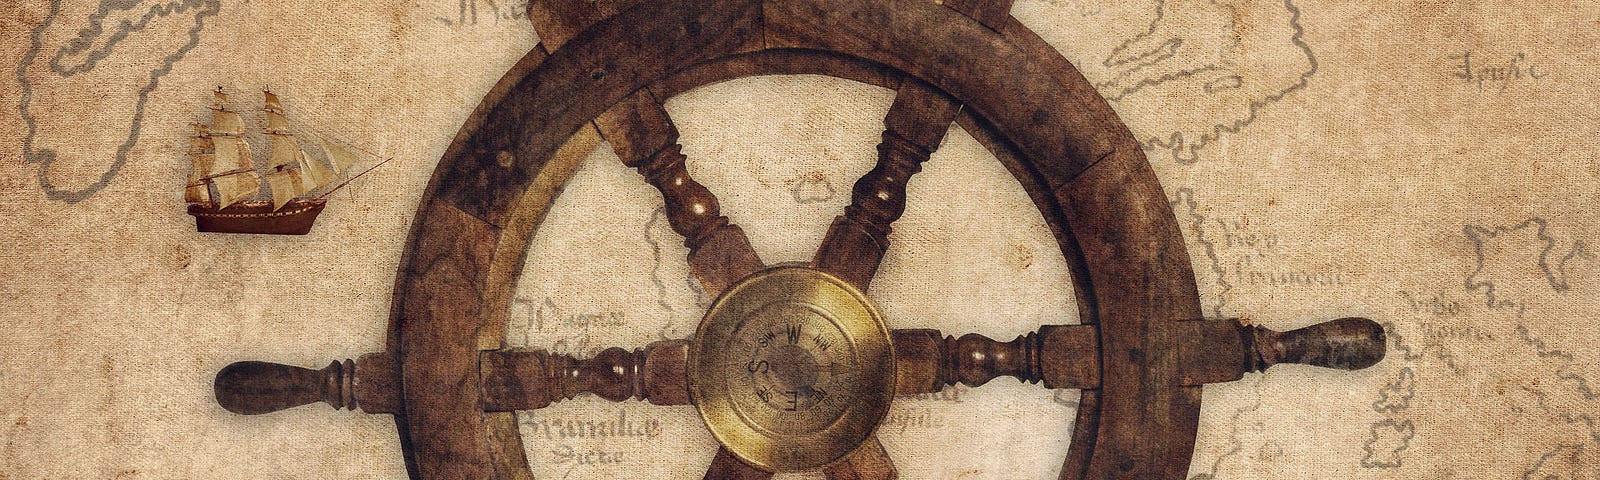 wooden captain’s wheel from a ship